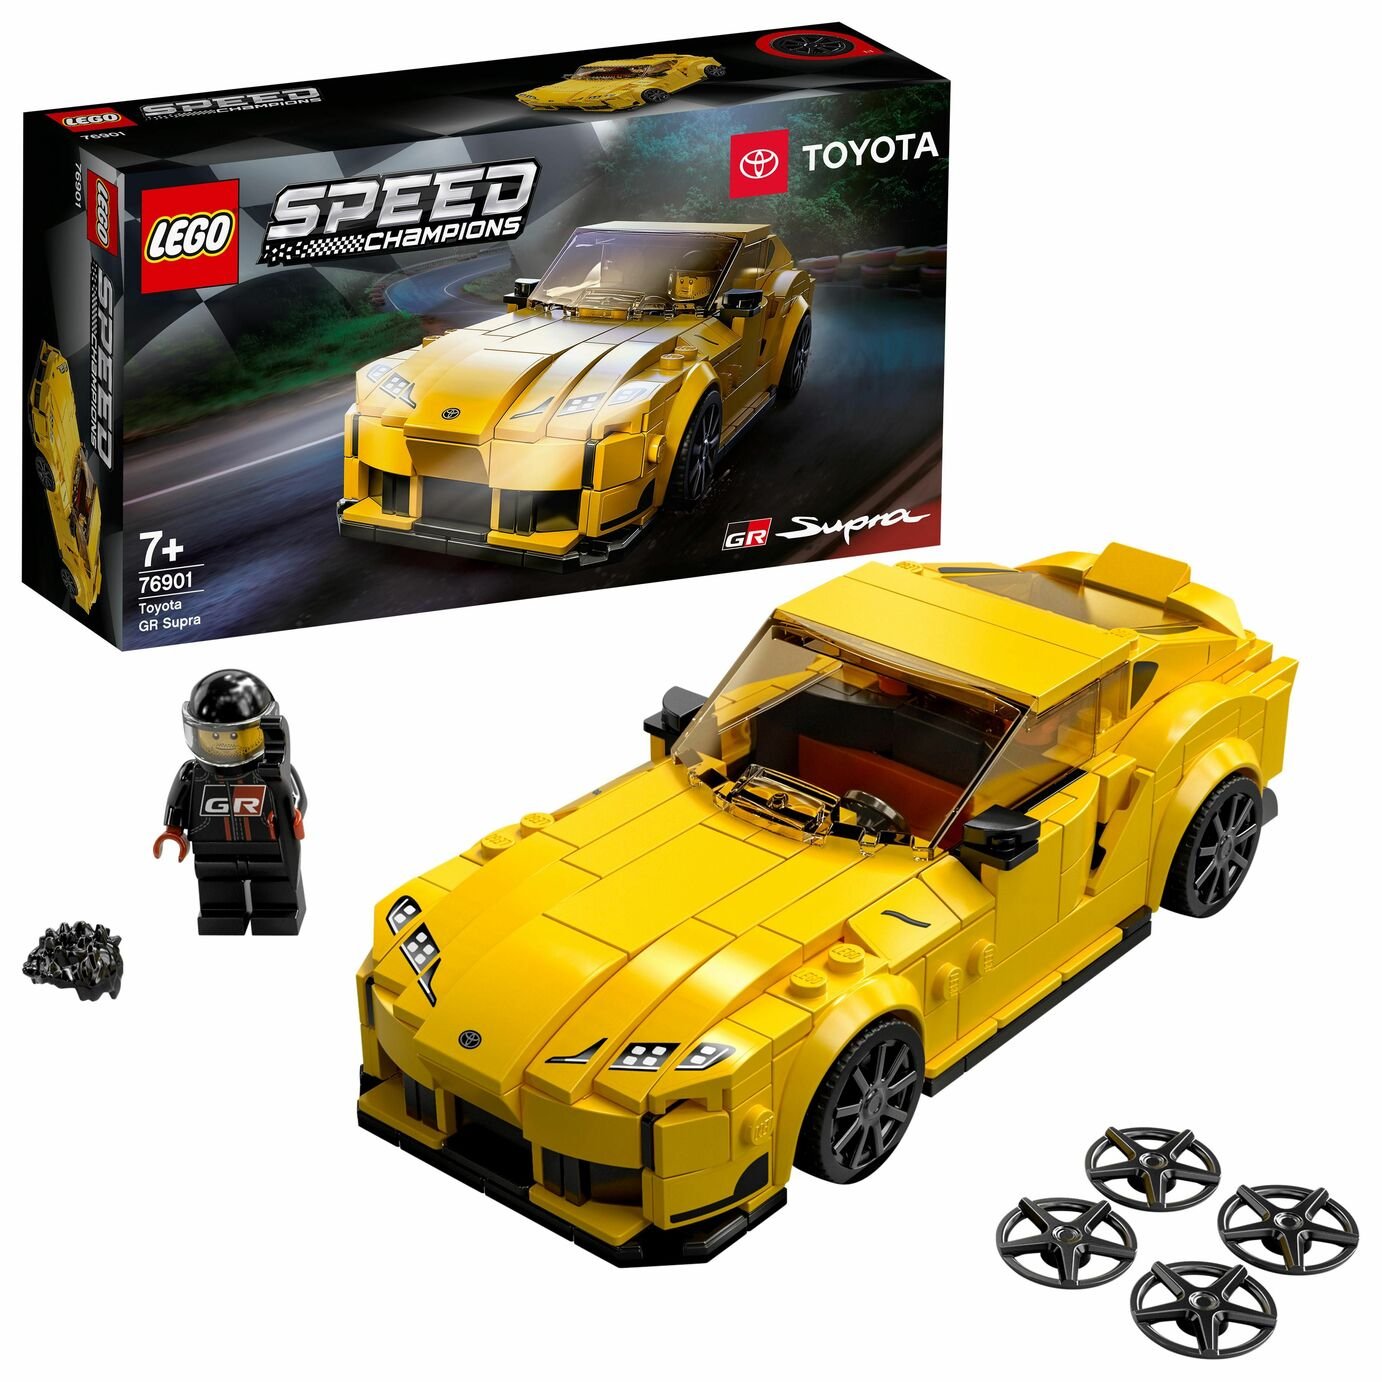 LEGO Speed Champions Toyota GR Supra Racing Car Toy 76901 review